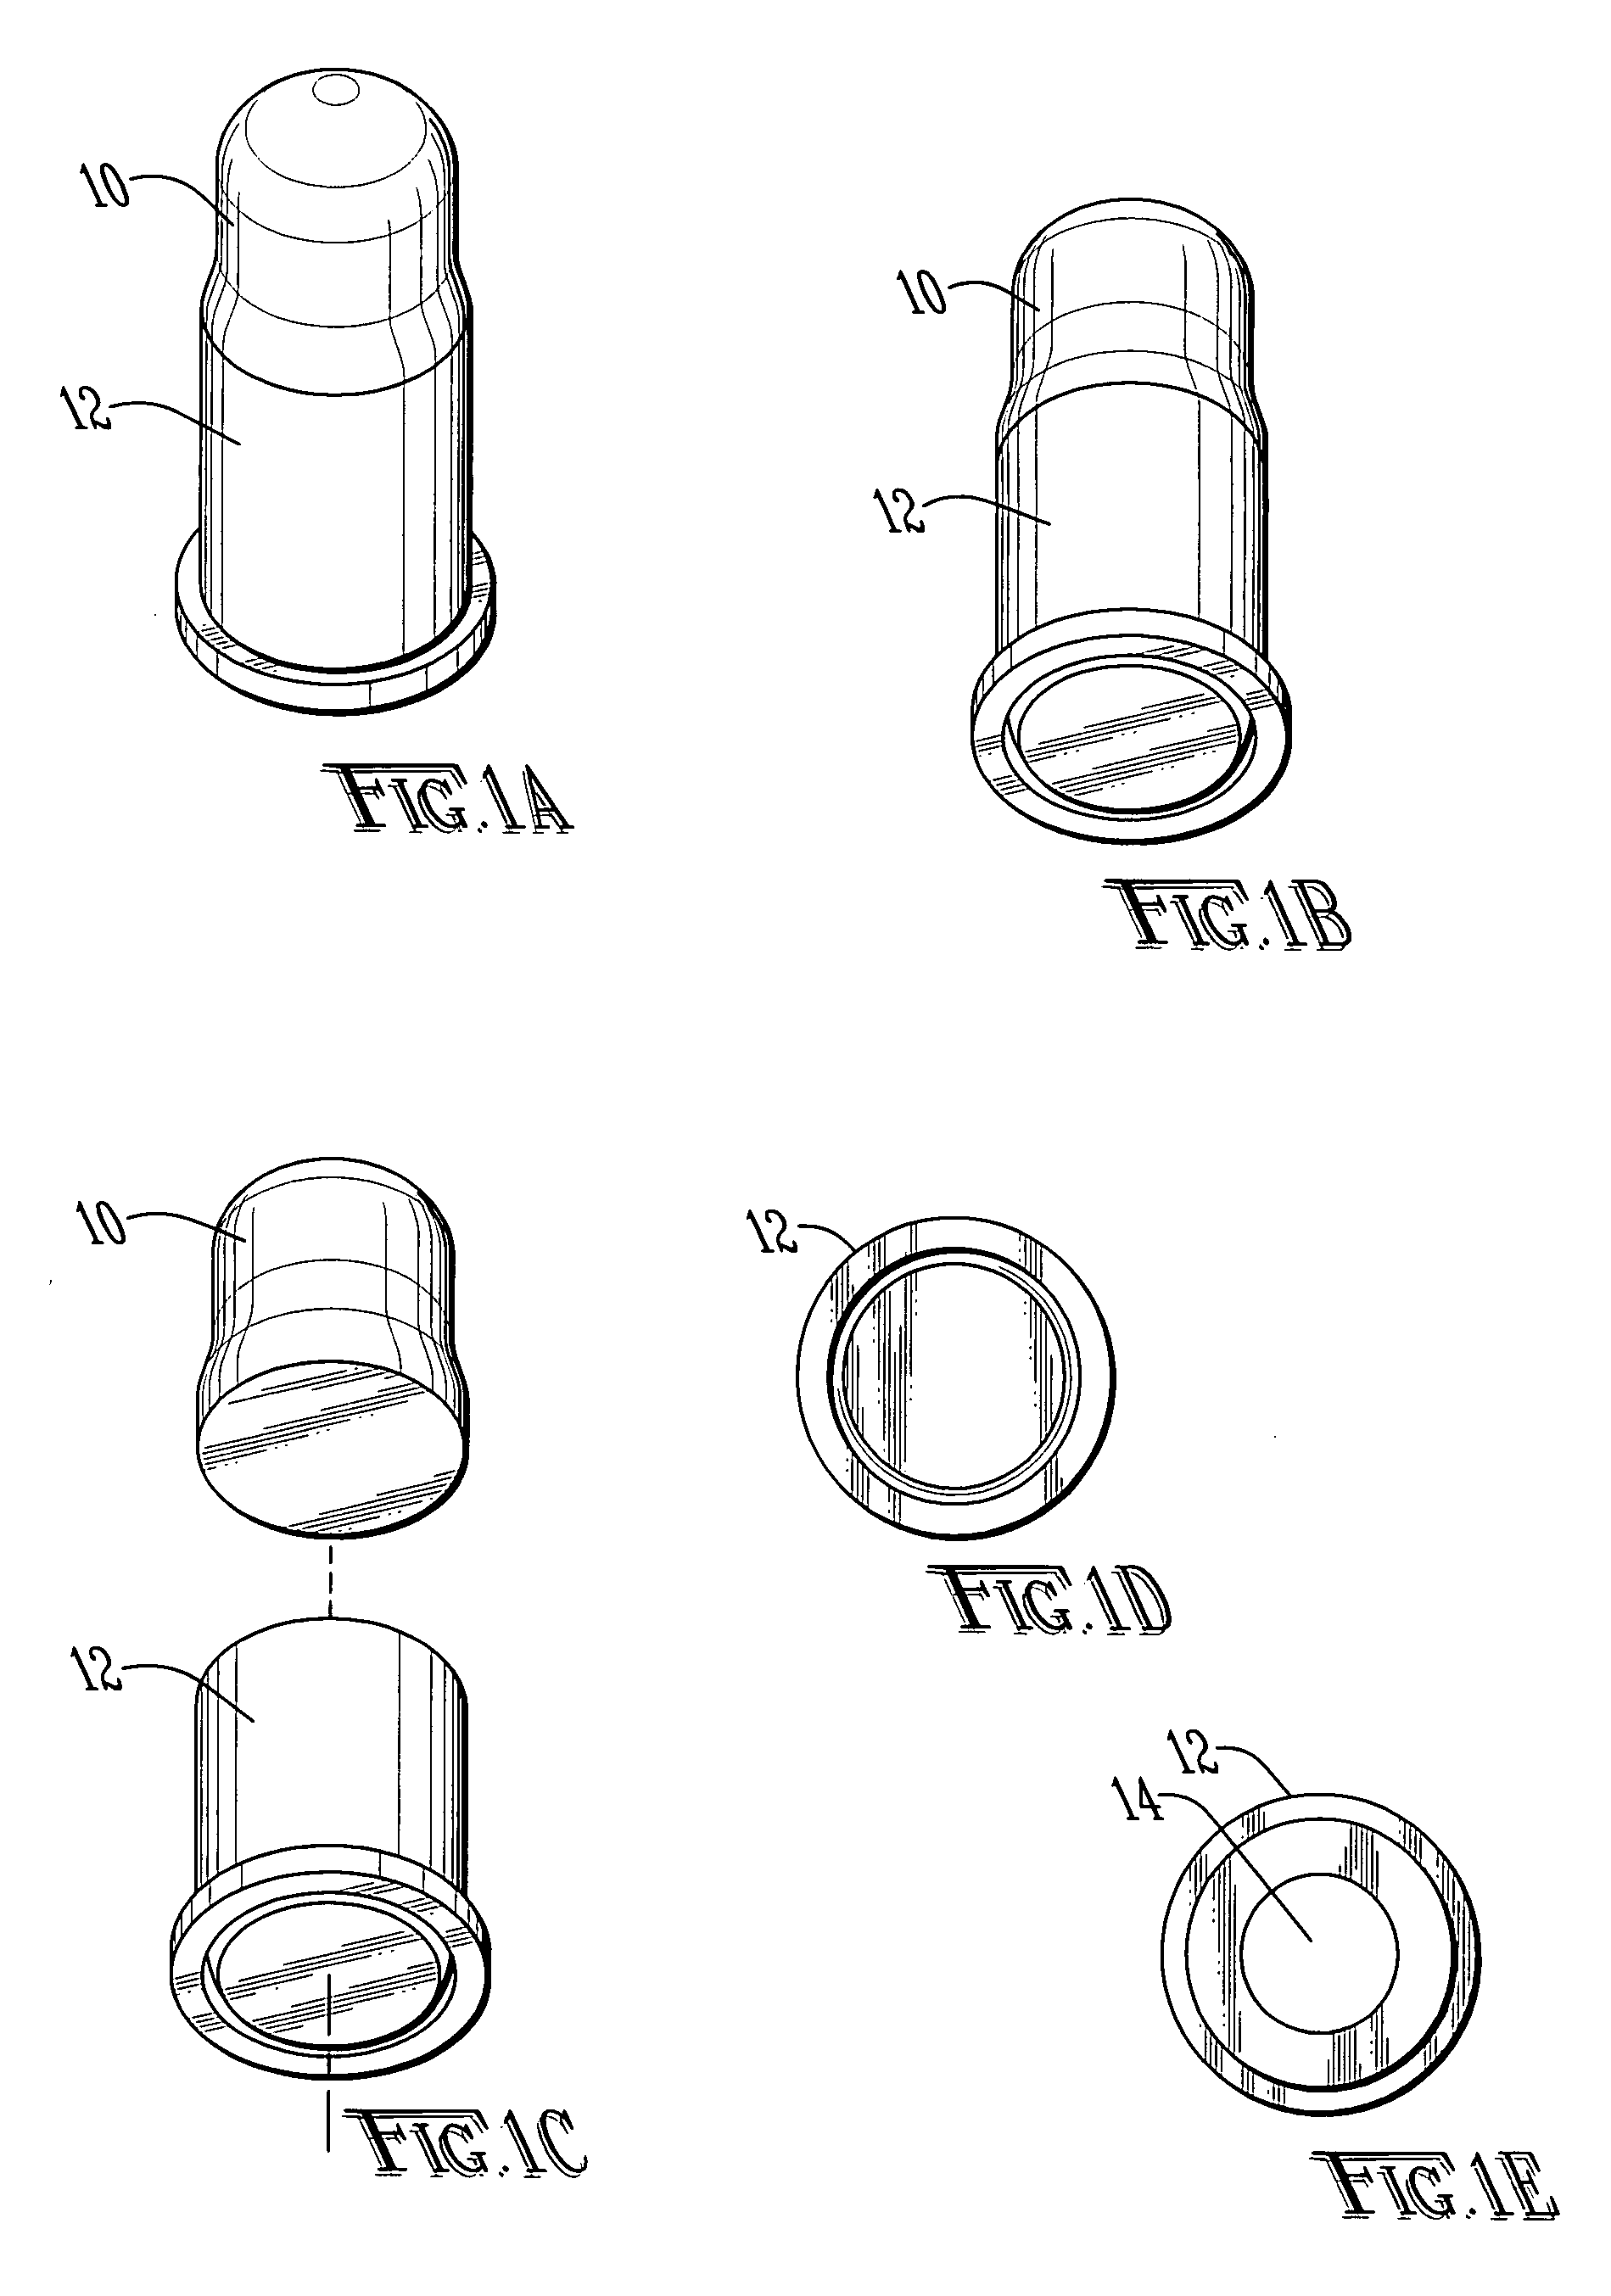 Method and apparatus for propelling a pellet or BB using a shock-sensitive explosive cap